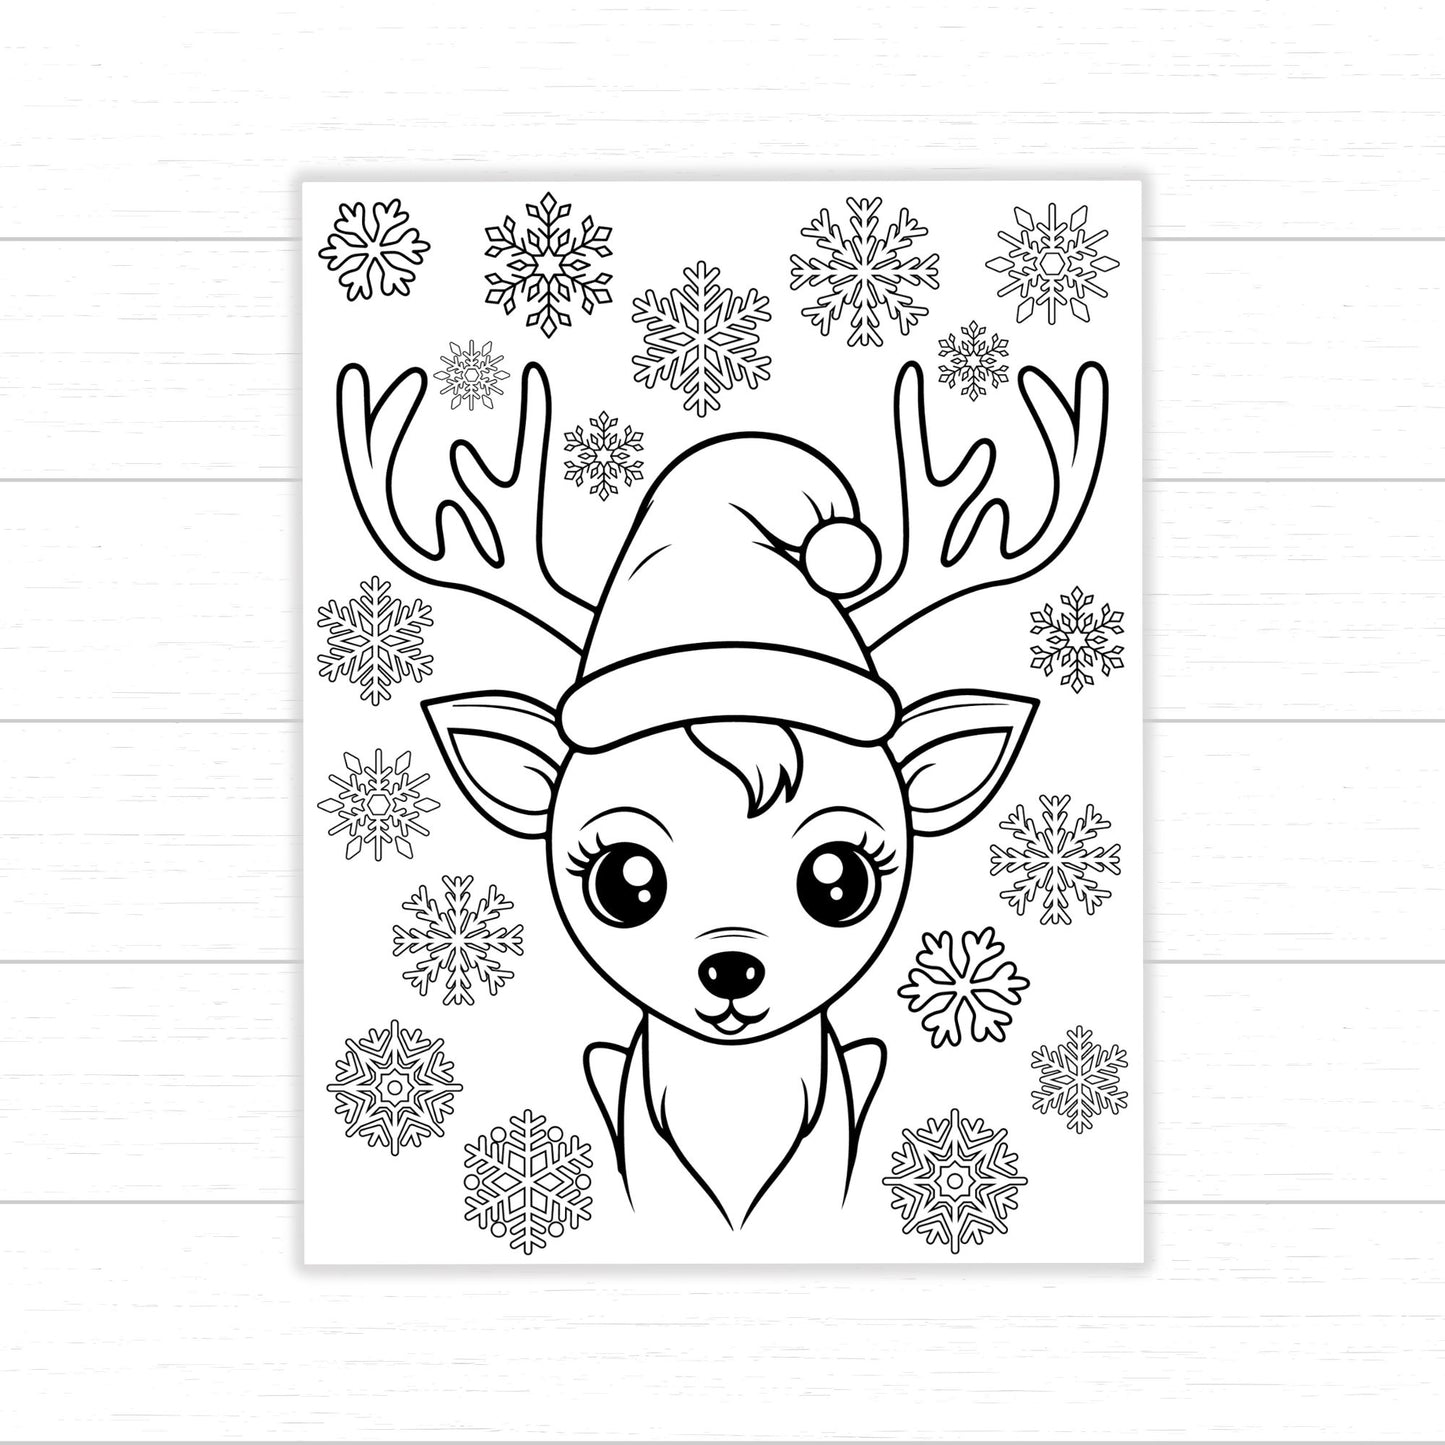 Christmas Reindeer Coloring Pages, Winter Reindeer Coloring Pages, Reindeer Coloring Pages, Christmas Coloring Pages, Christmas Activities